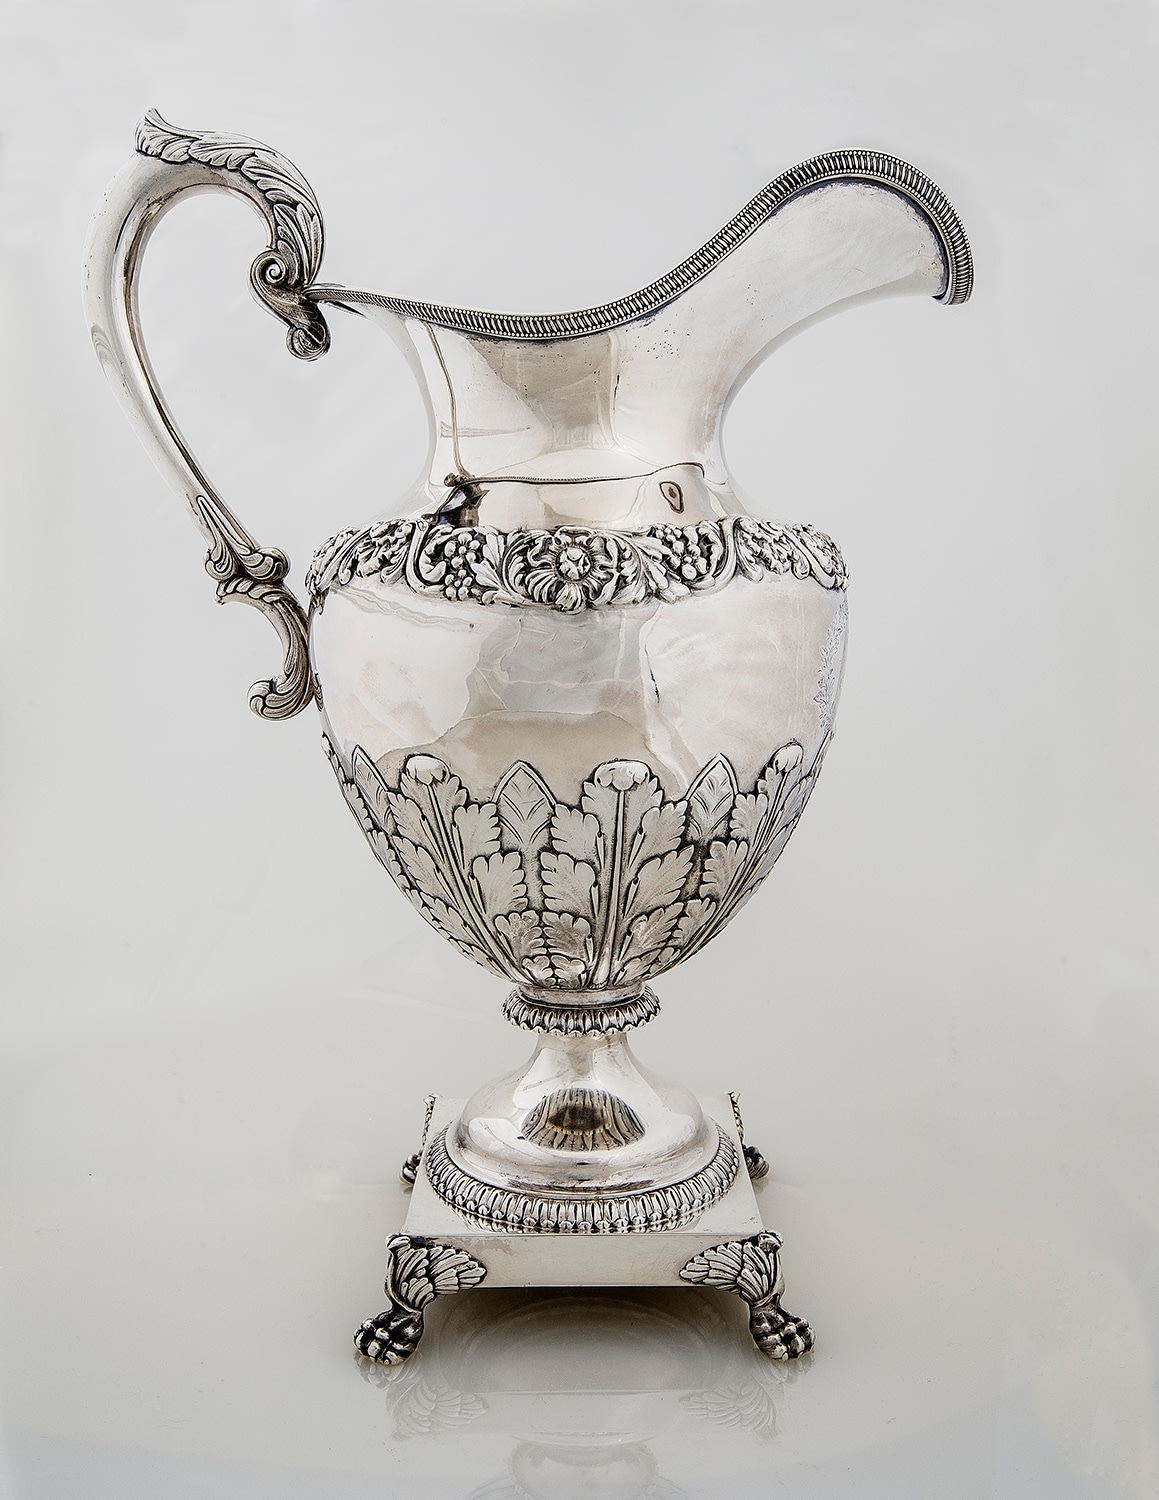 Monumental Ewer with Presentation Inscription to Mrs. John S. Barbour, 1832